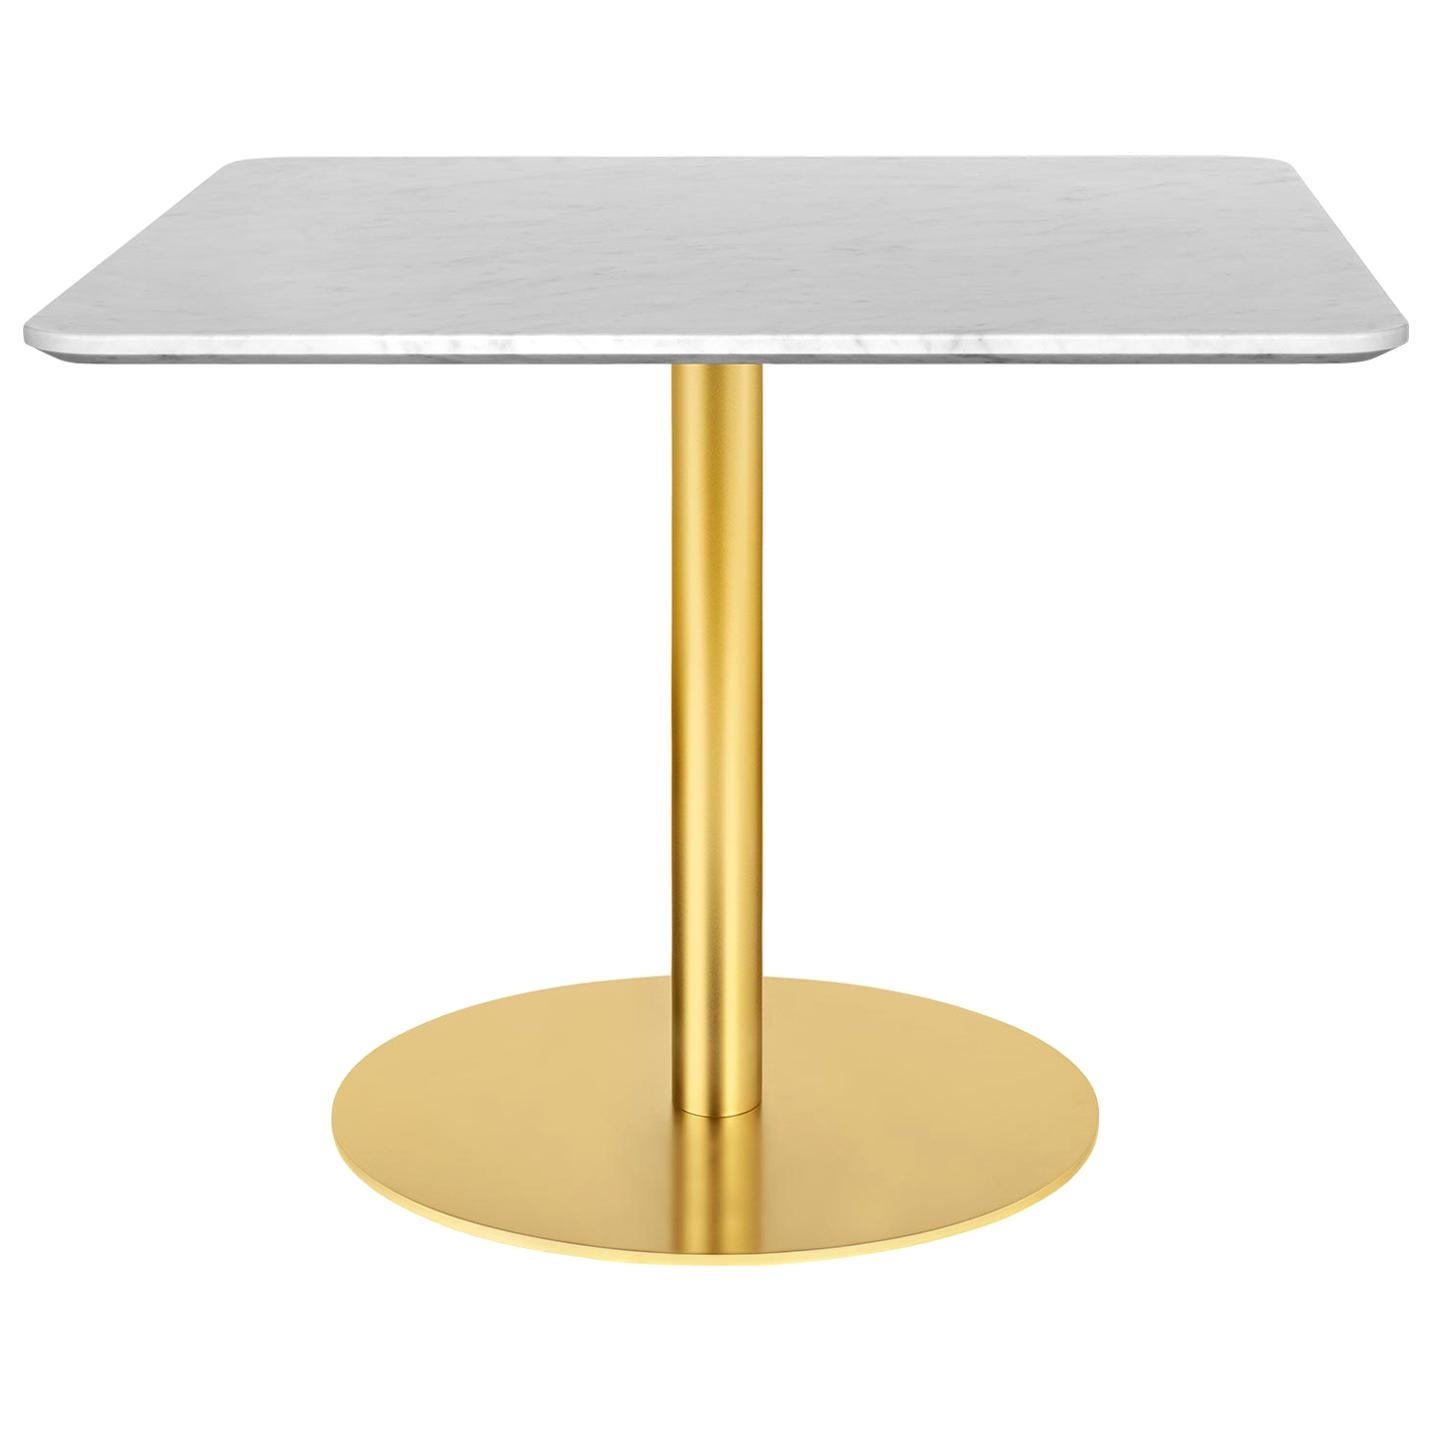 1.0 Lounge Table, Square, Round Brass Base, Medium, Glass For Sale